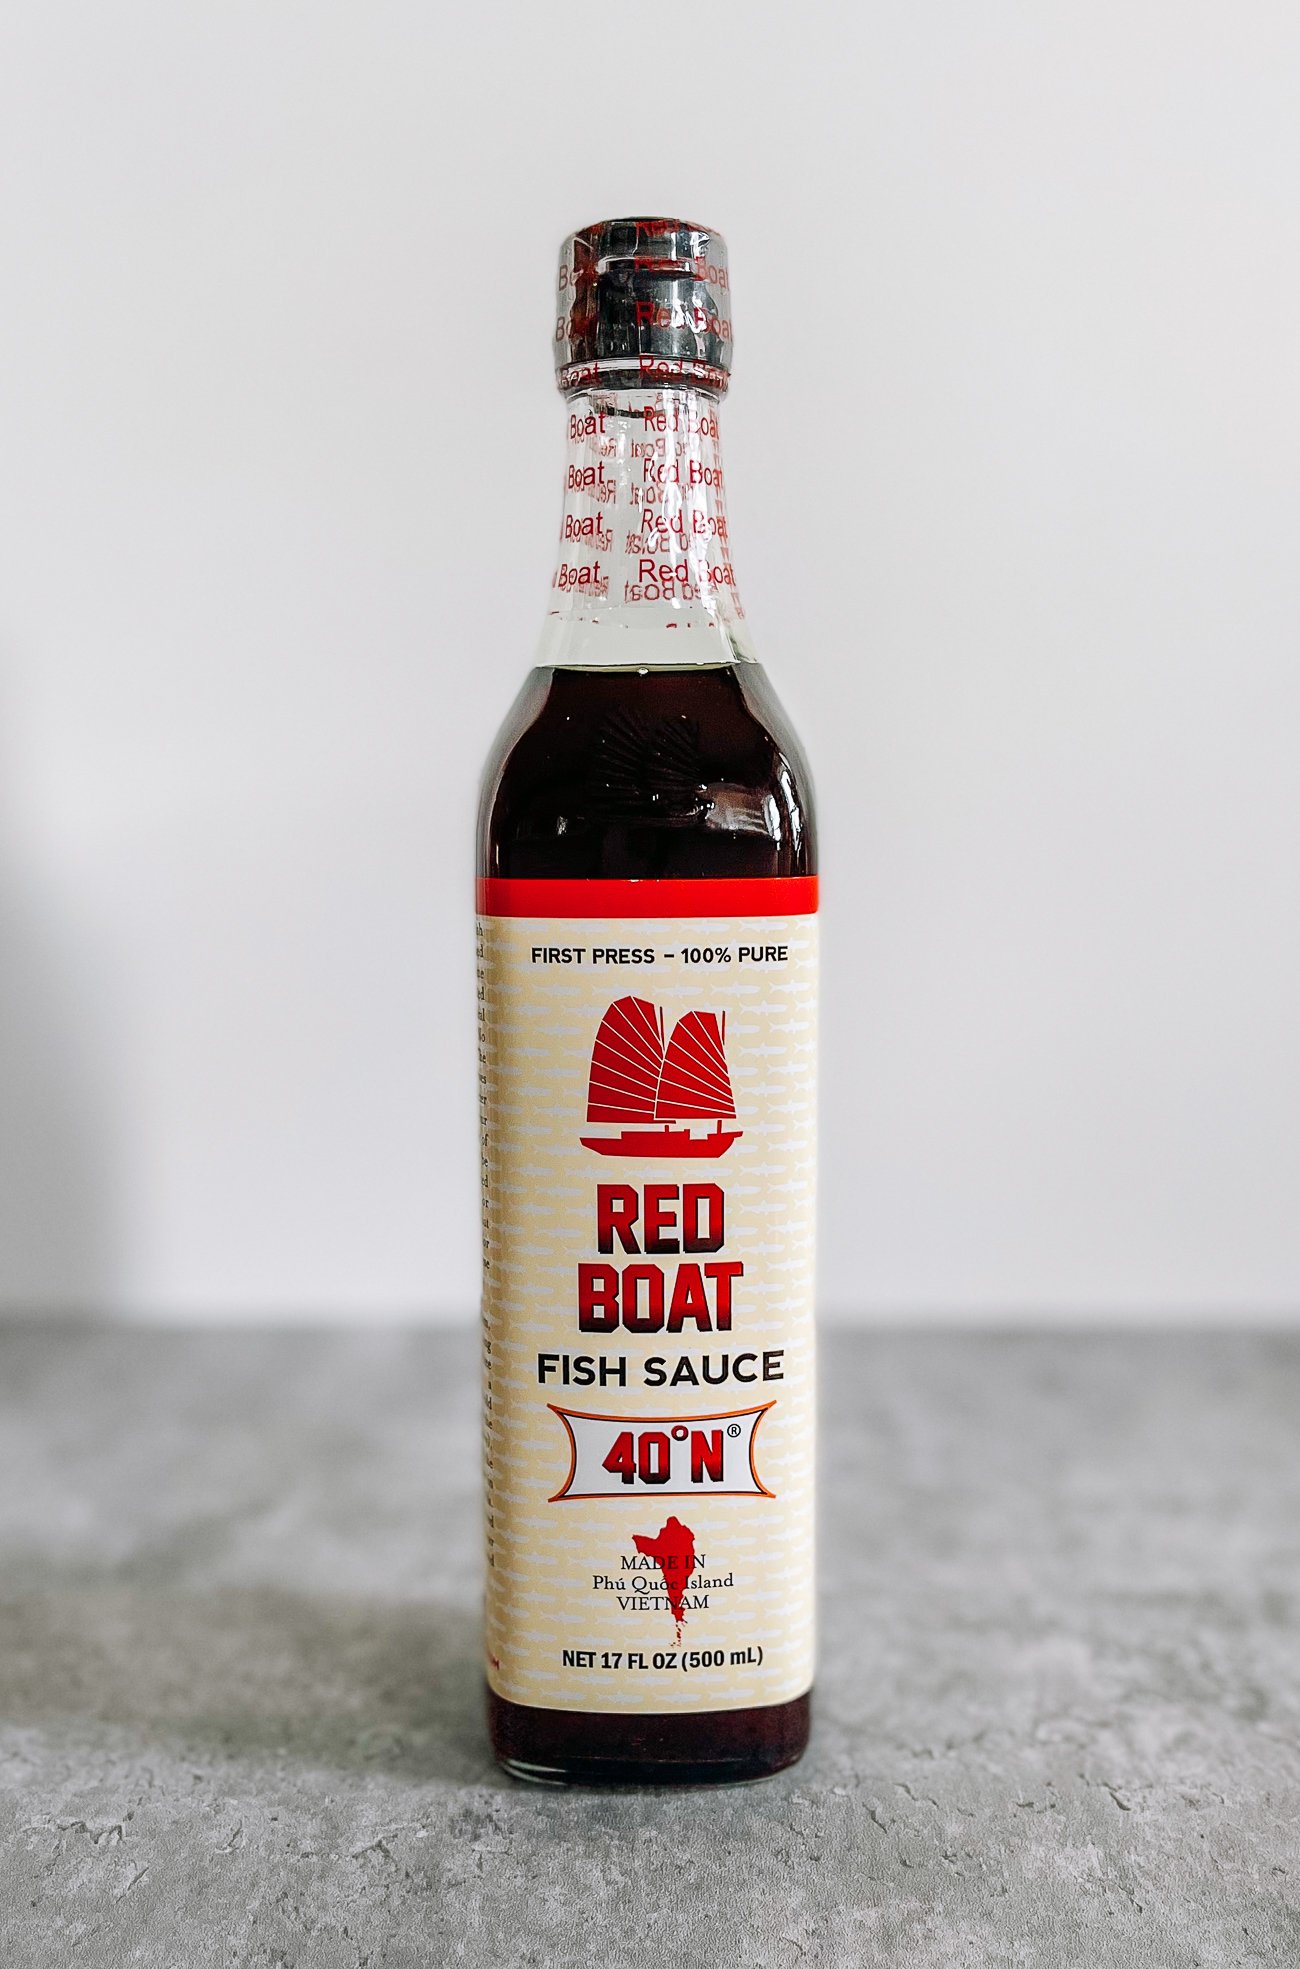 Bottle of Fish Sauce (red boat brand)